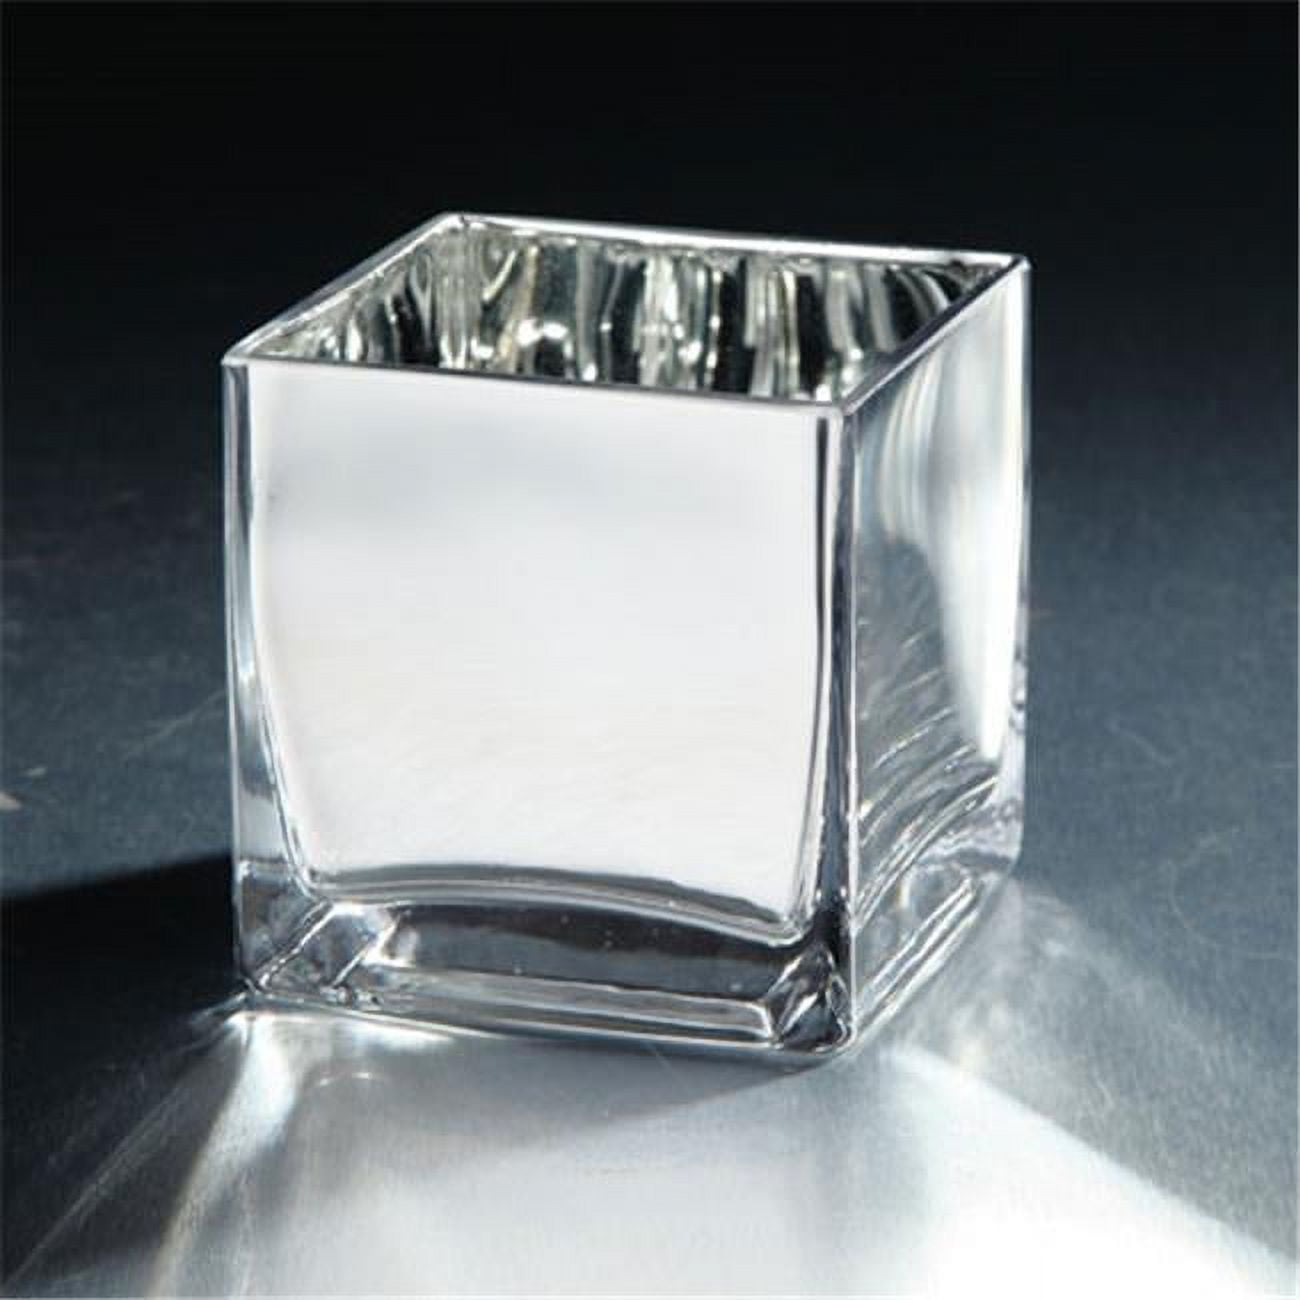 57099 4 X 4 X 4 In. Square Candle Holder, Silver